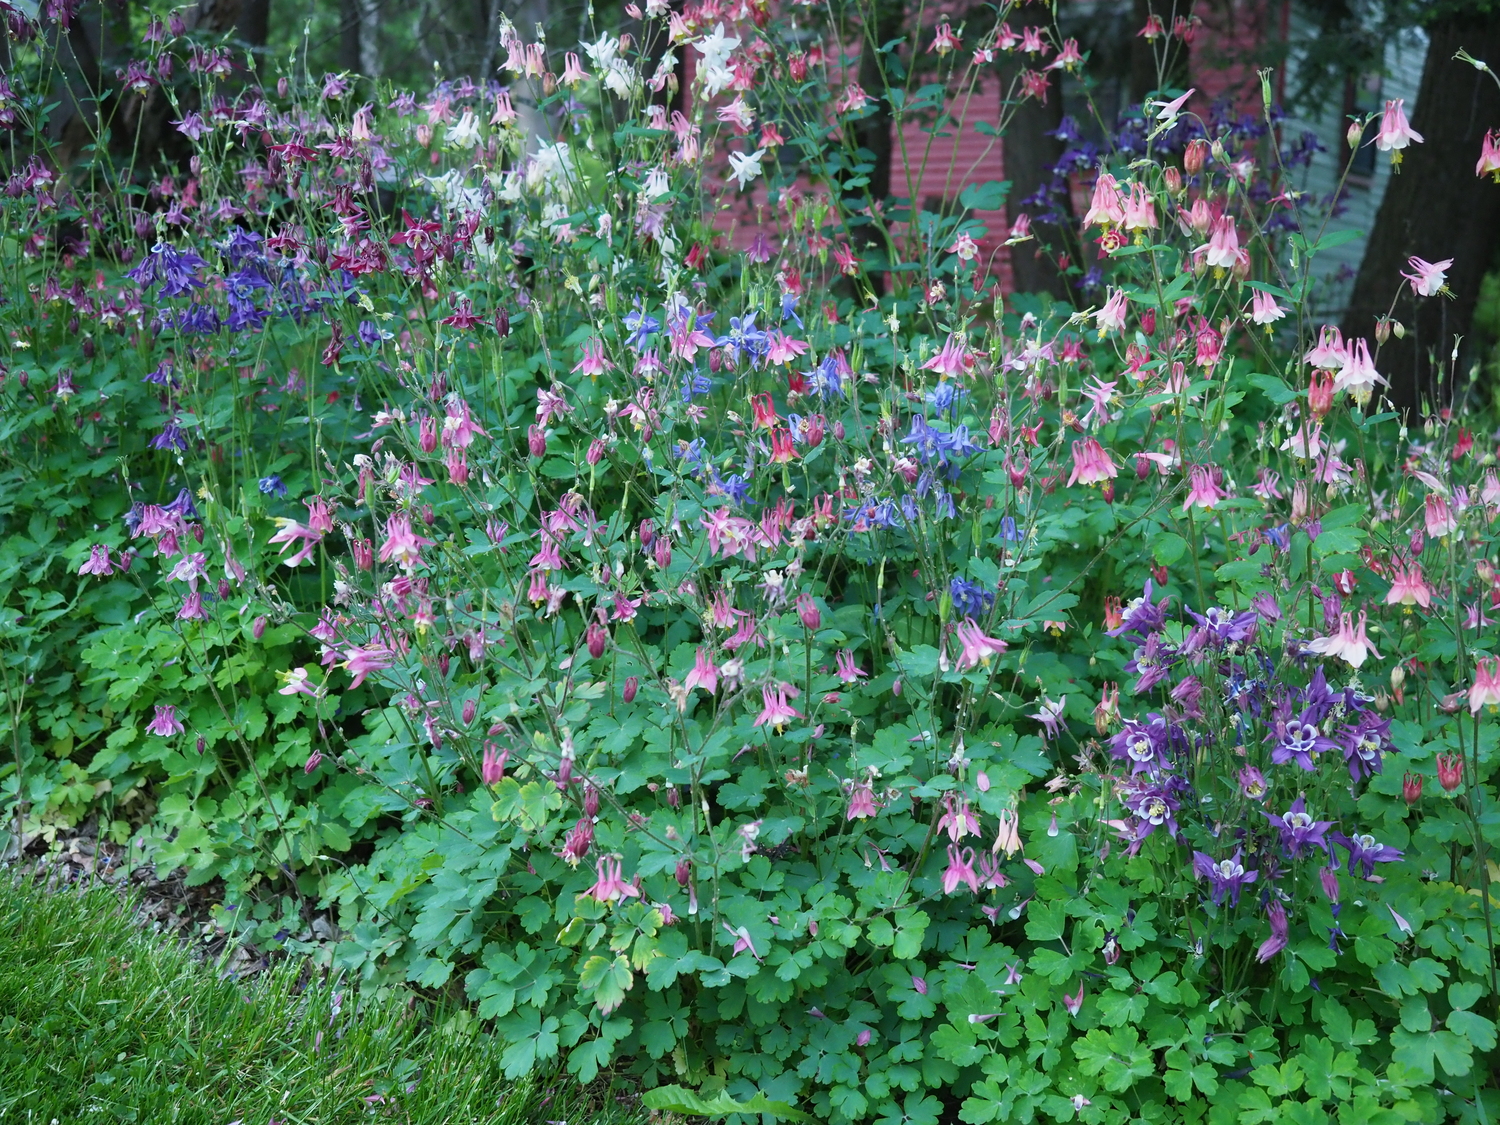 Just past their peak, these columbines are random hybrid crosses thanks to mother nature and her pollinator insects and hummingbirds.  ANDREW MESSINGER